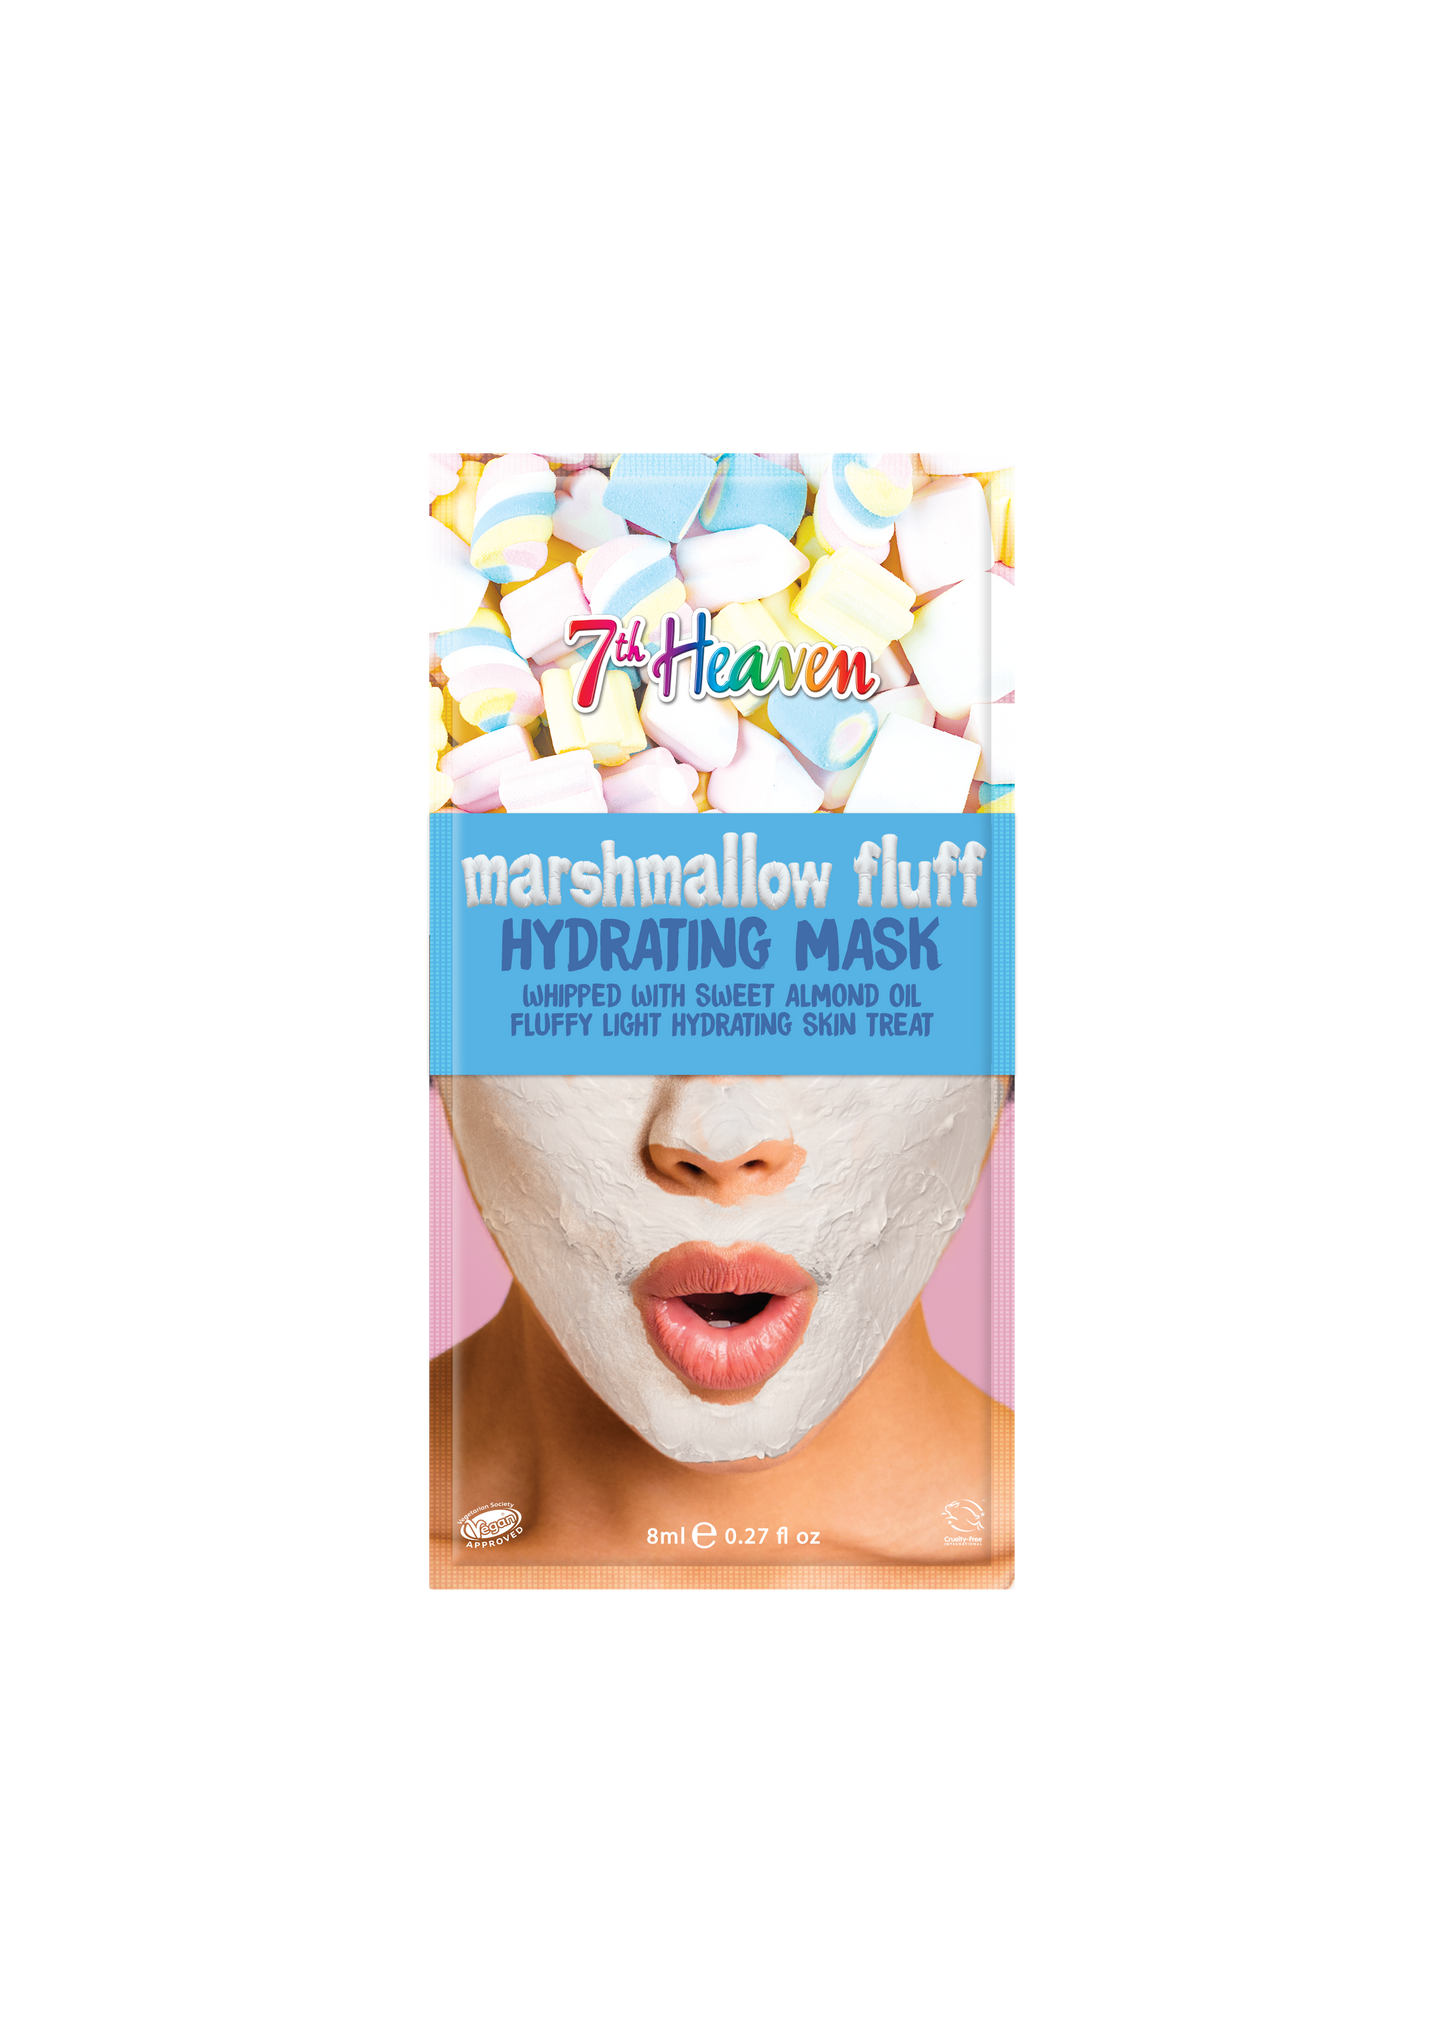 7th Heaven Marshmallow Fluff Face Mask with Sweet Almond Oil and Aloe Vera to Hydrate and Moisturise Skin | Ideal for All Skin Types